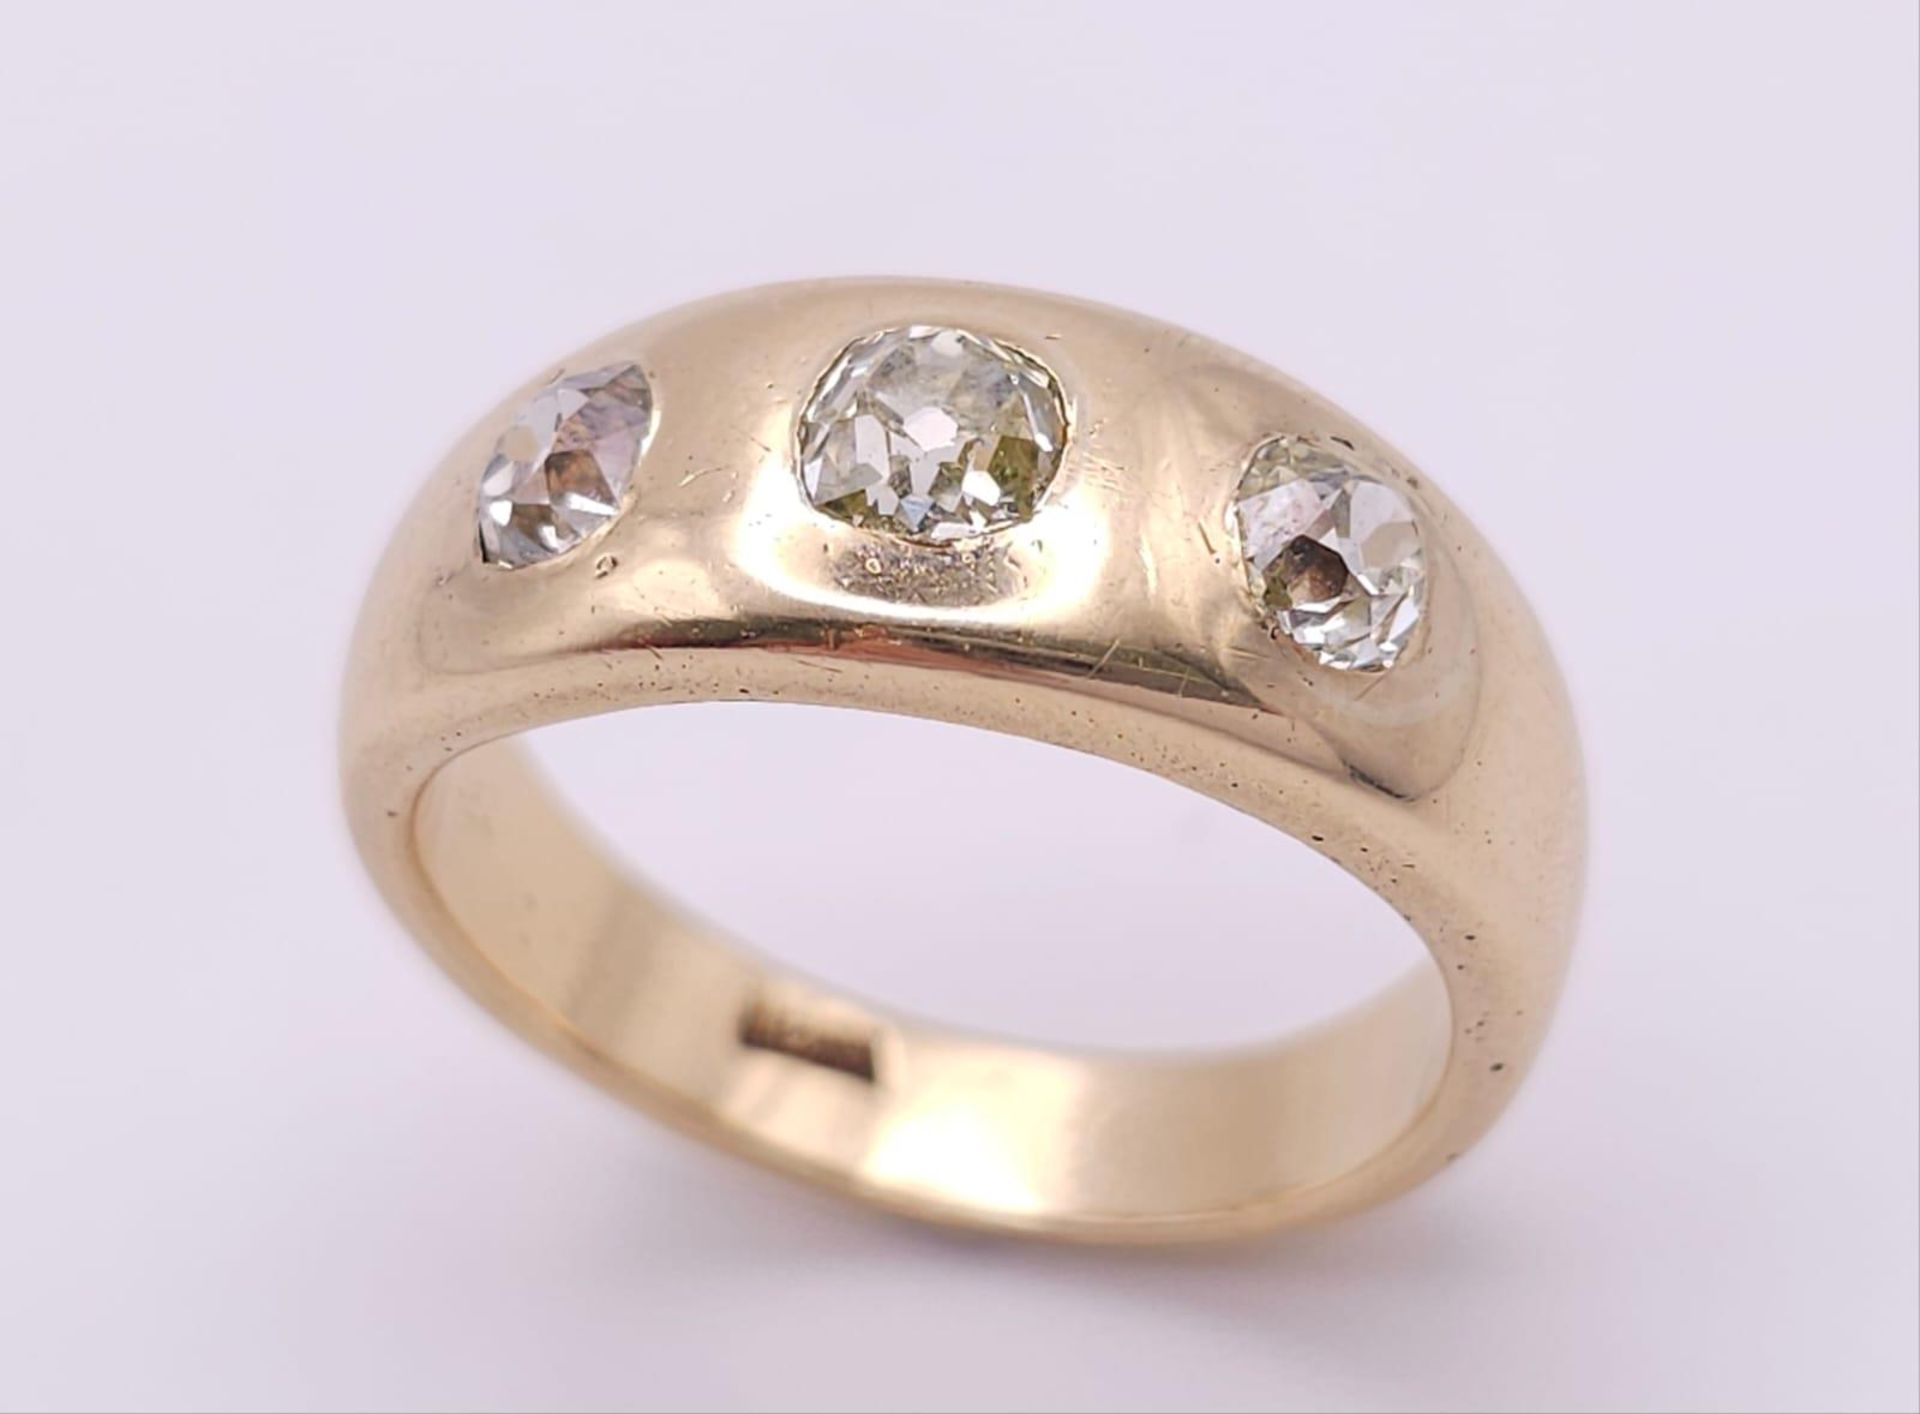 18K YELLOW GOLD, OLD CUT DIMAOND, 3 STONE RING. APPROX 1.40CTW OF OLD CUTS. WEIGHT: 12.3G SIZE U